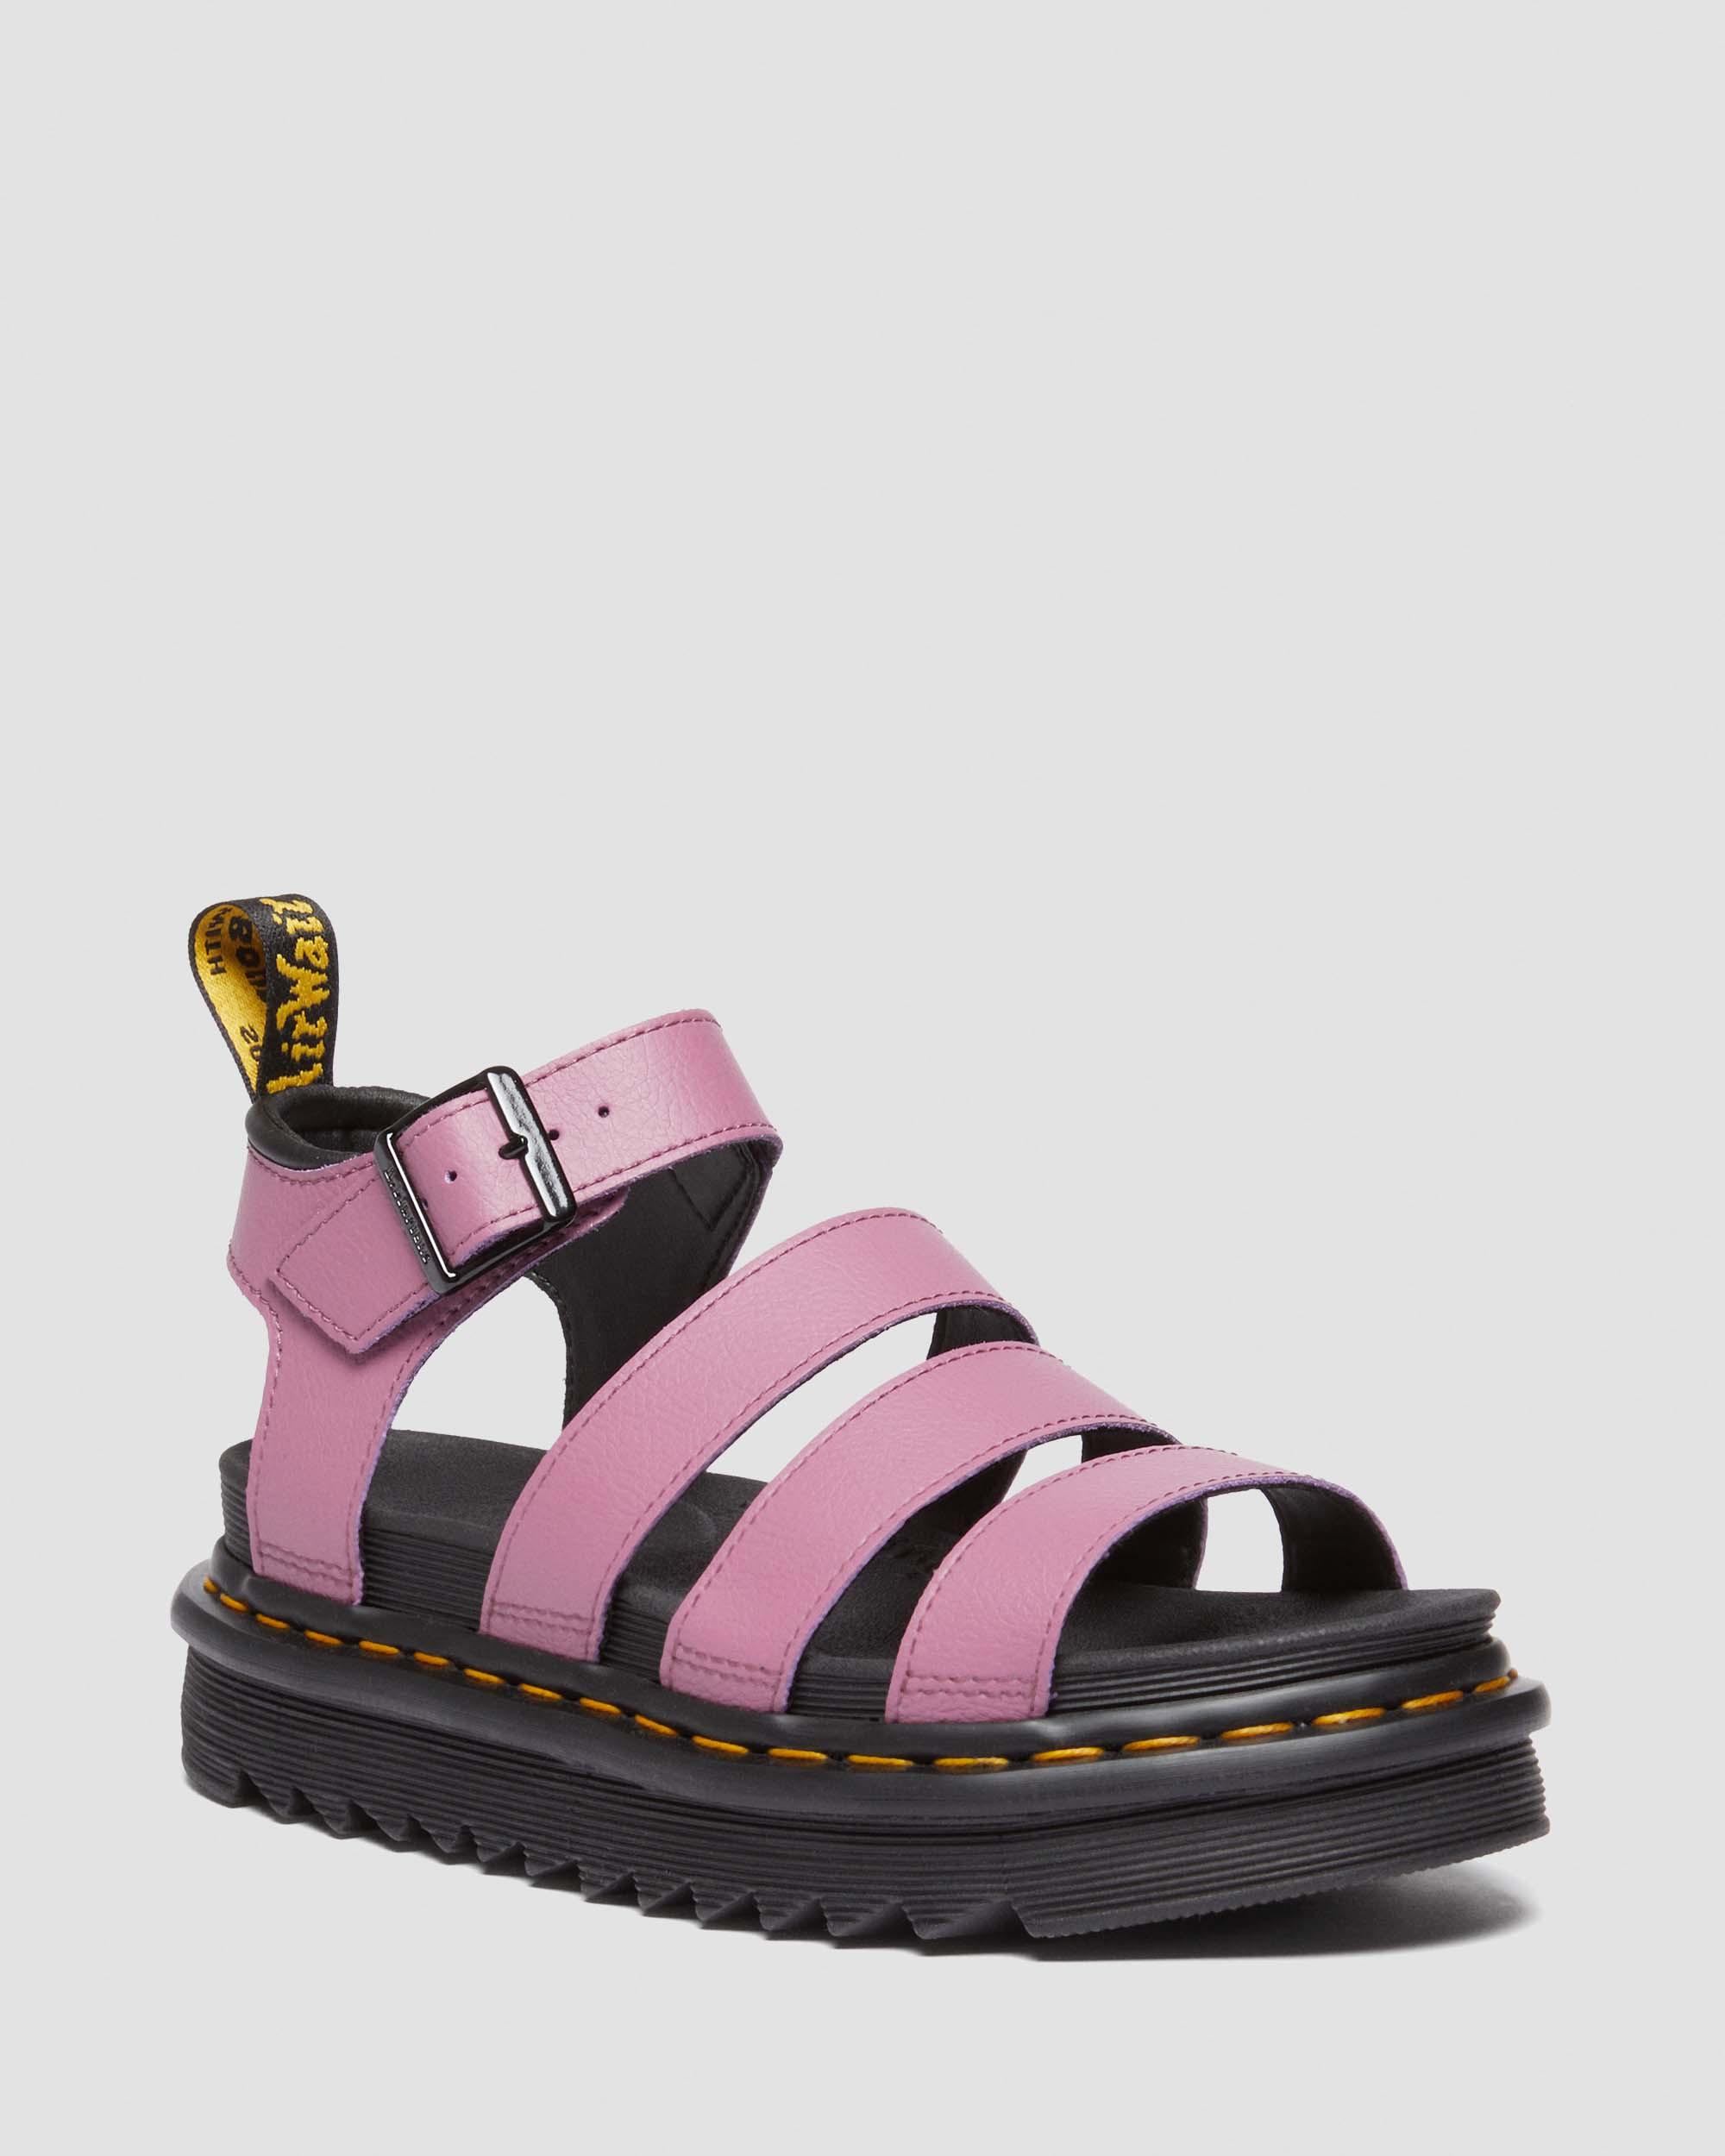 Blaire Athena Leather Strap Sandals in Muted Purple | Dr. Martens